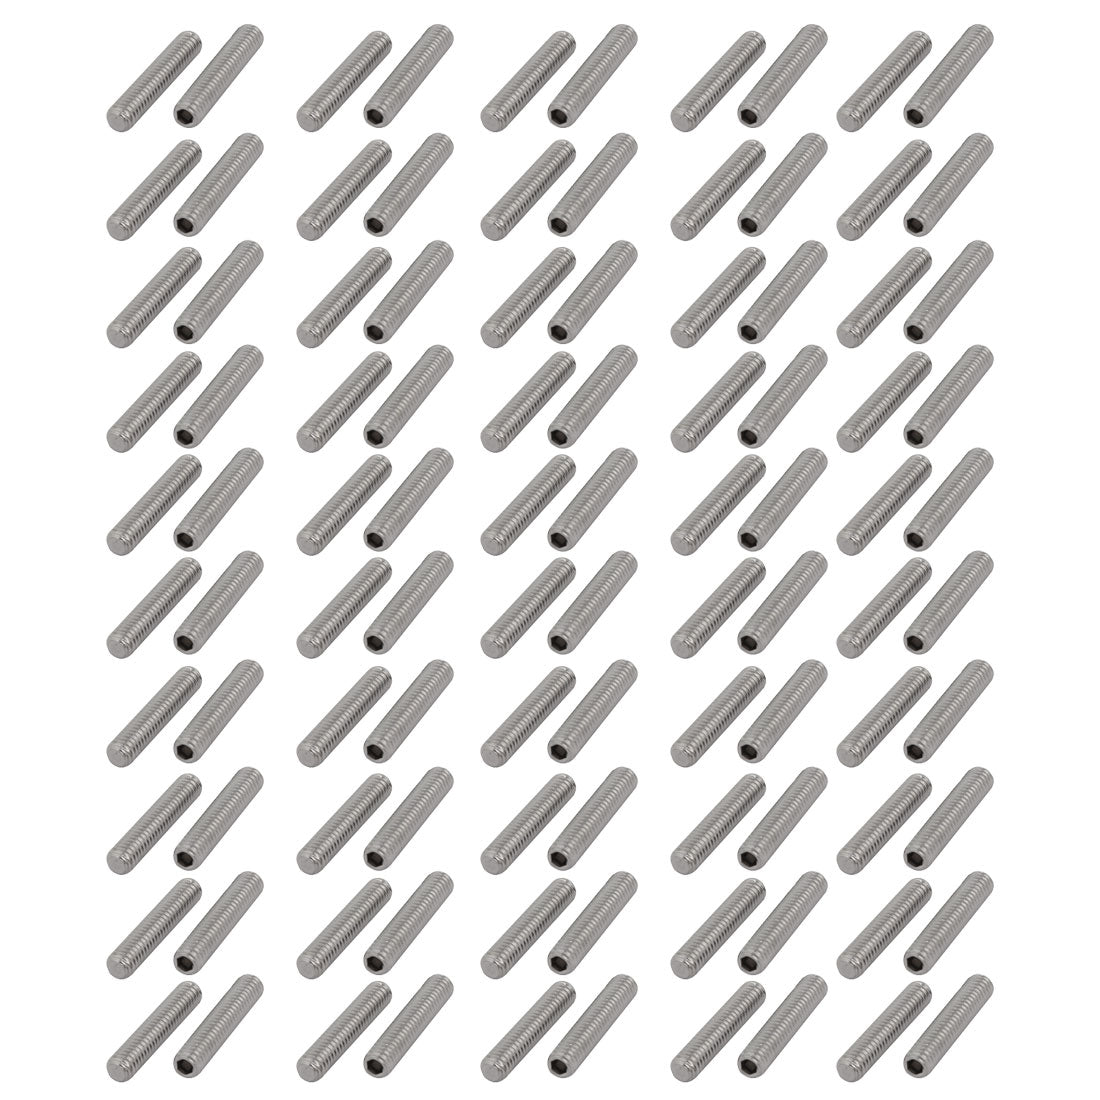 uxcell Uxcell 100 Pcs M4 x 20mm 304 Stainless Steel Hex Socket Drive Flat Point Grub Screw